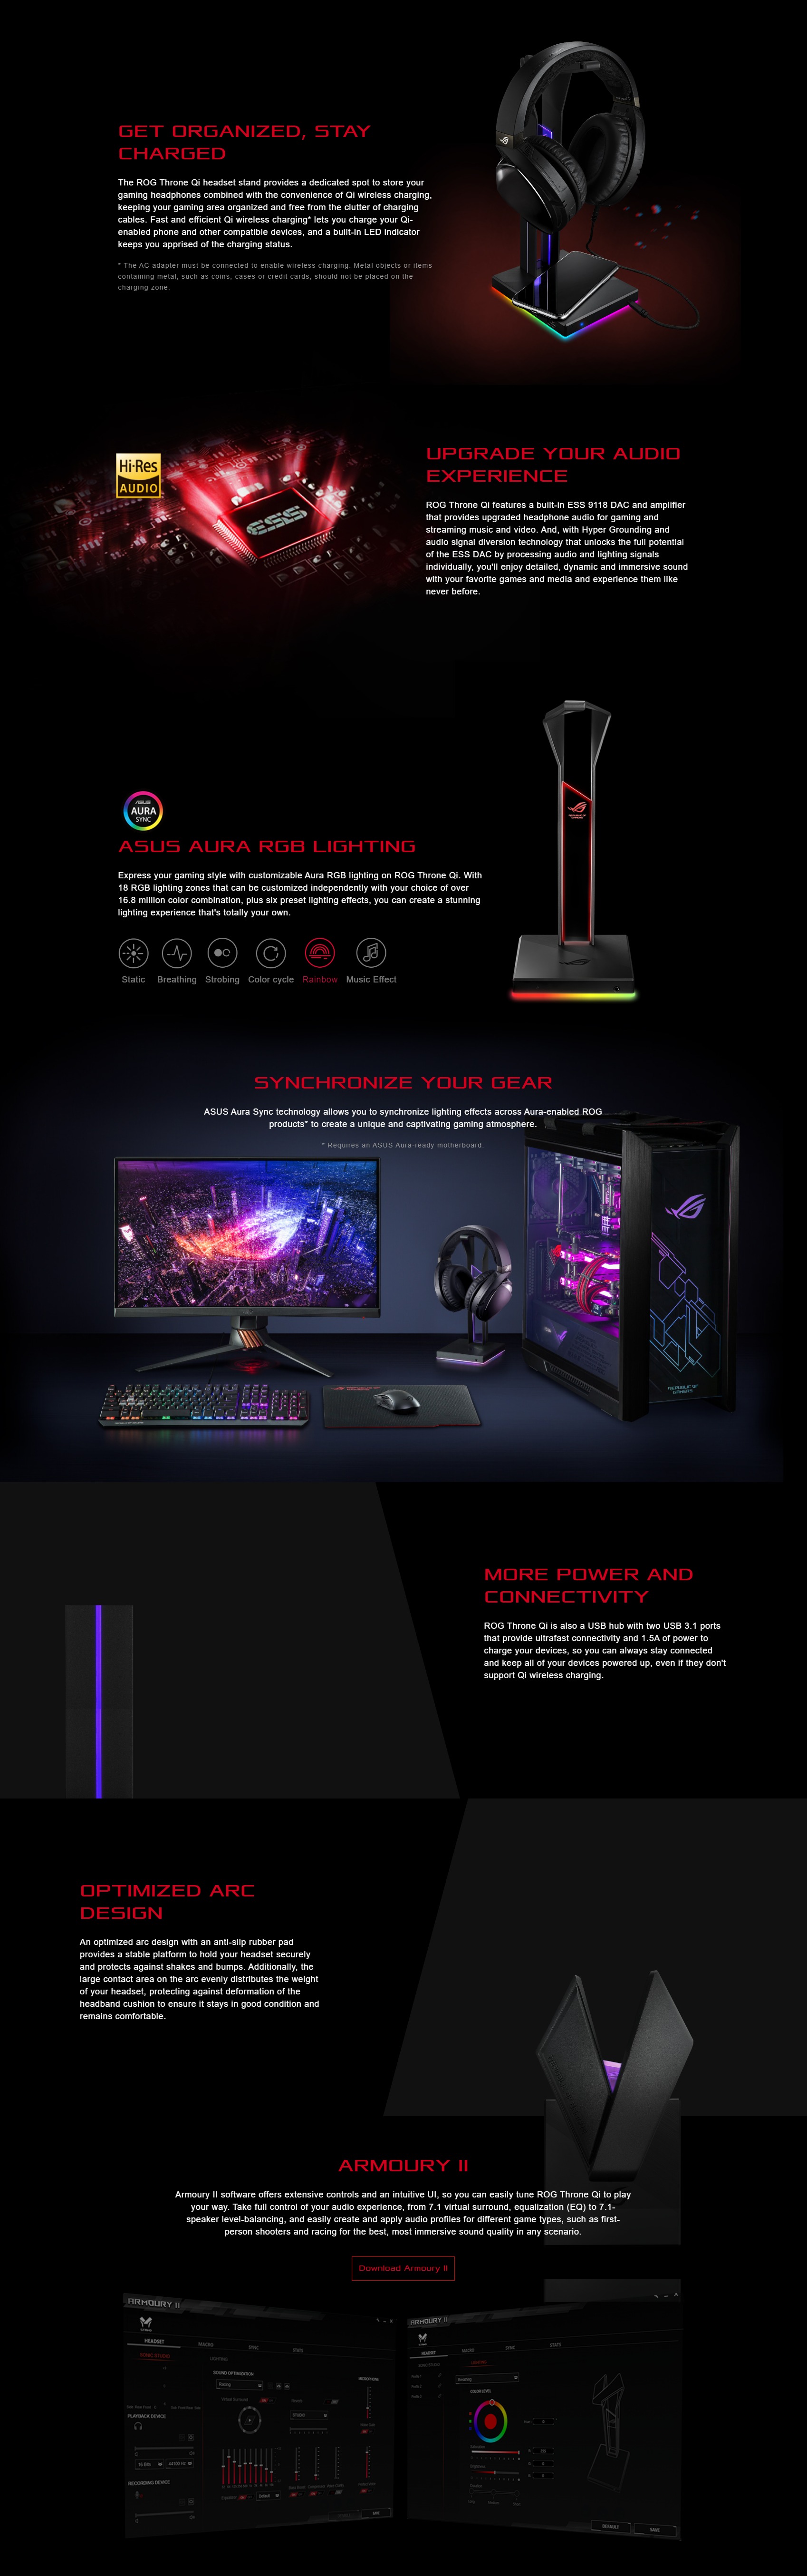 A large marketing image providing additional information about the product ASUS ROG Throne Qi Headset Stand - Additional alt info not provided